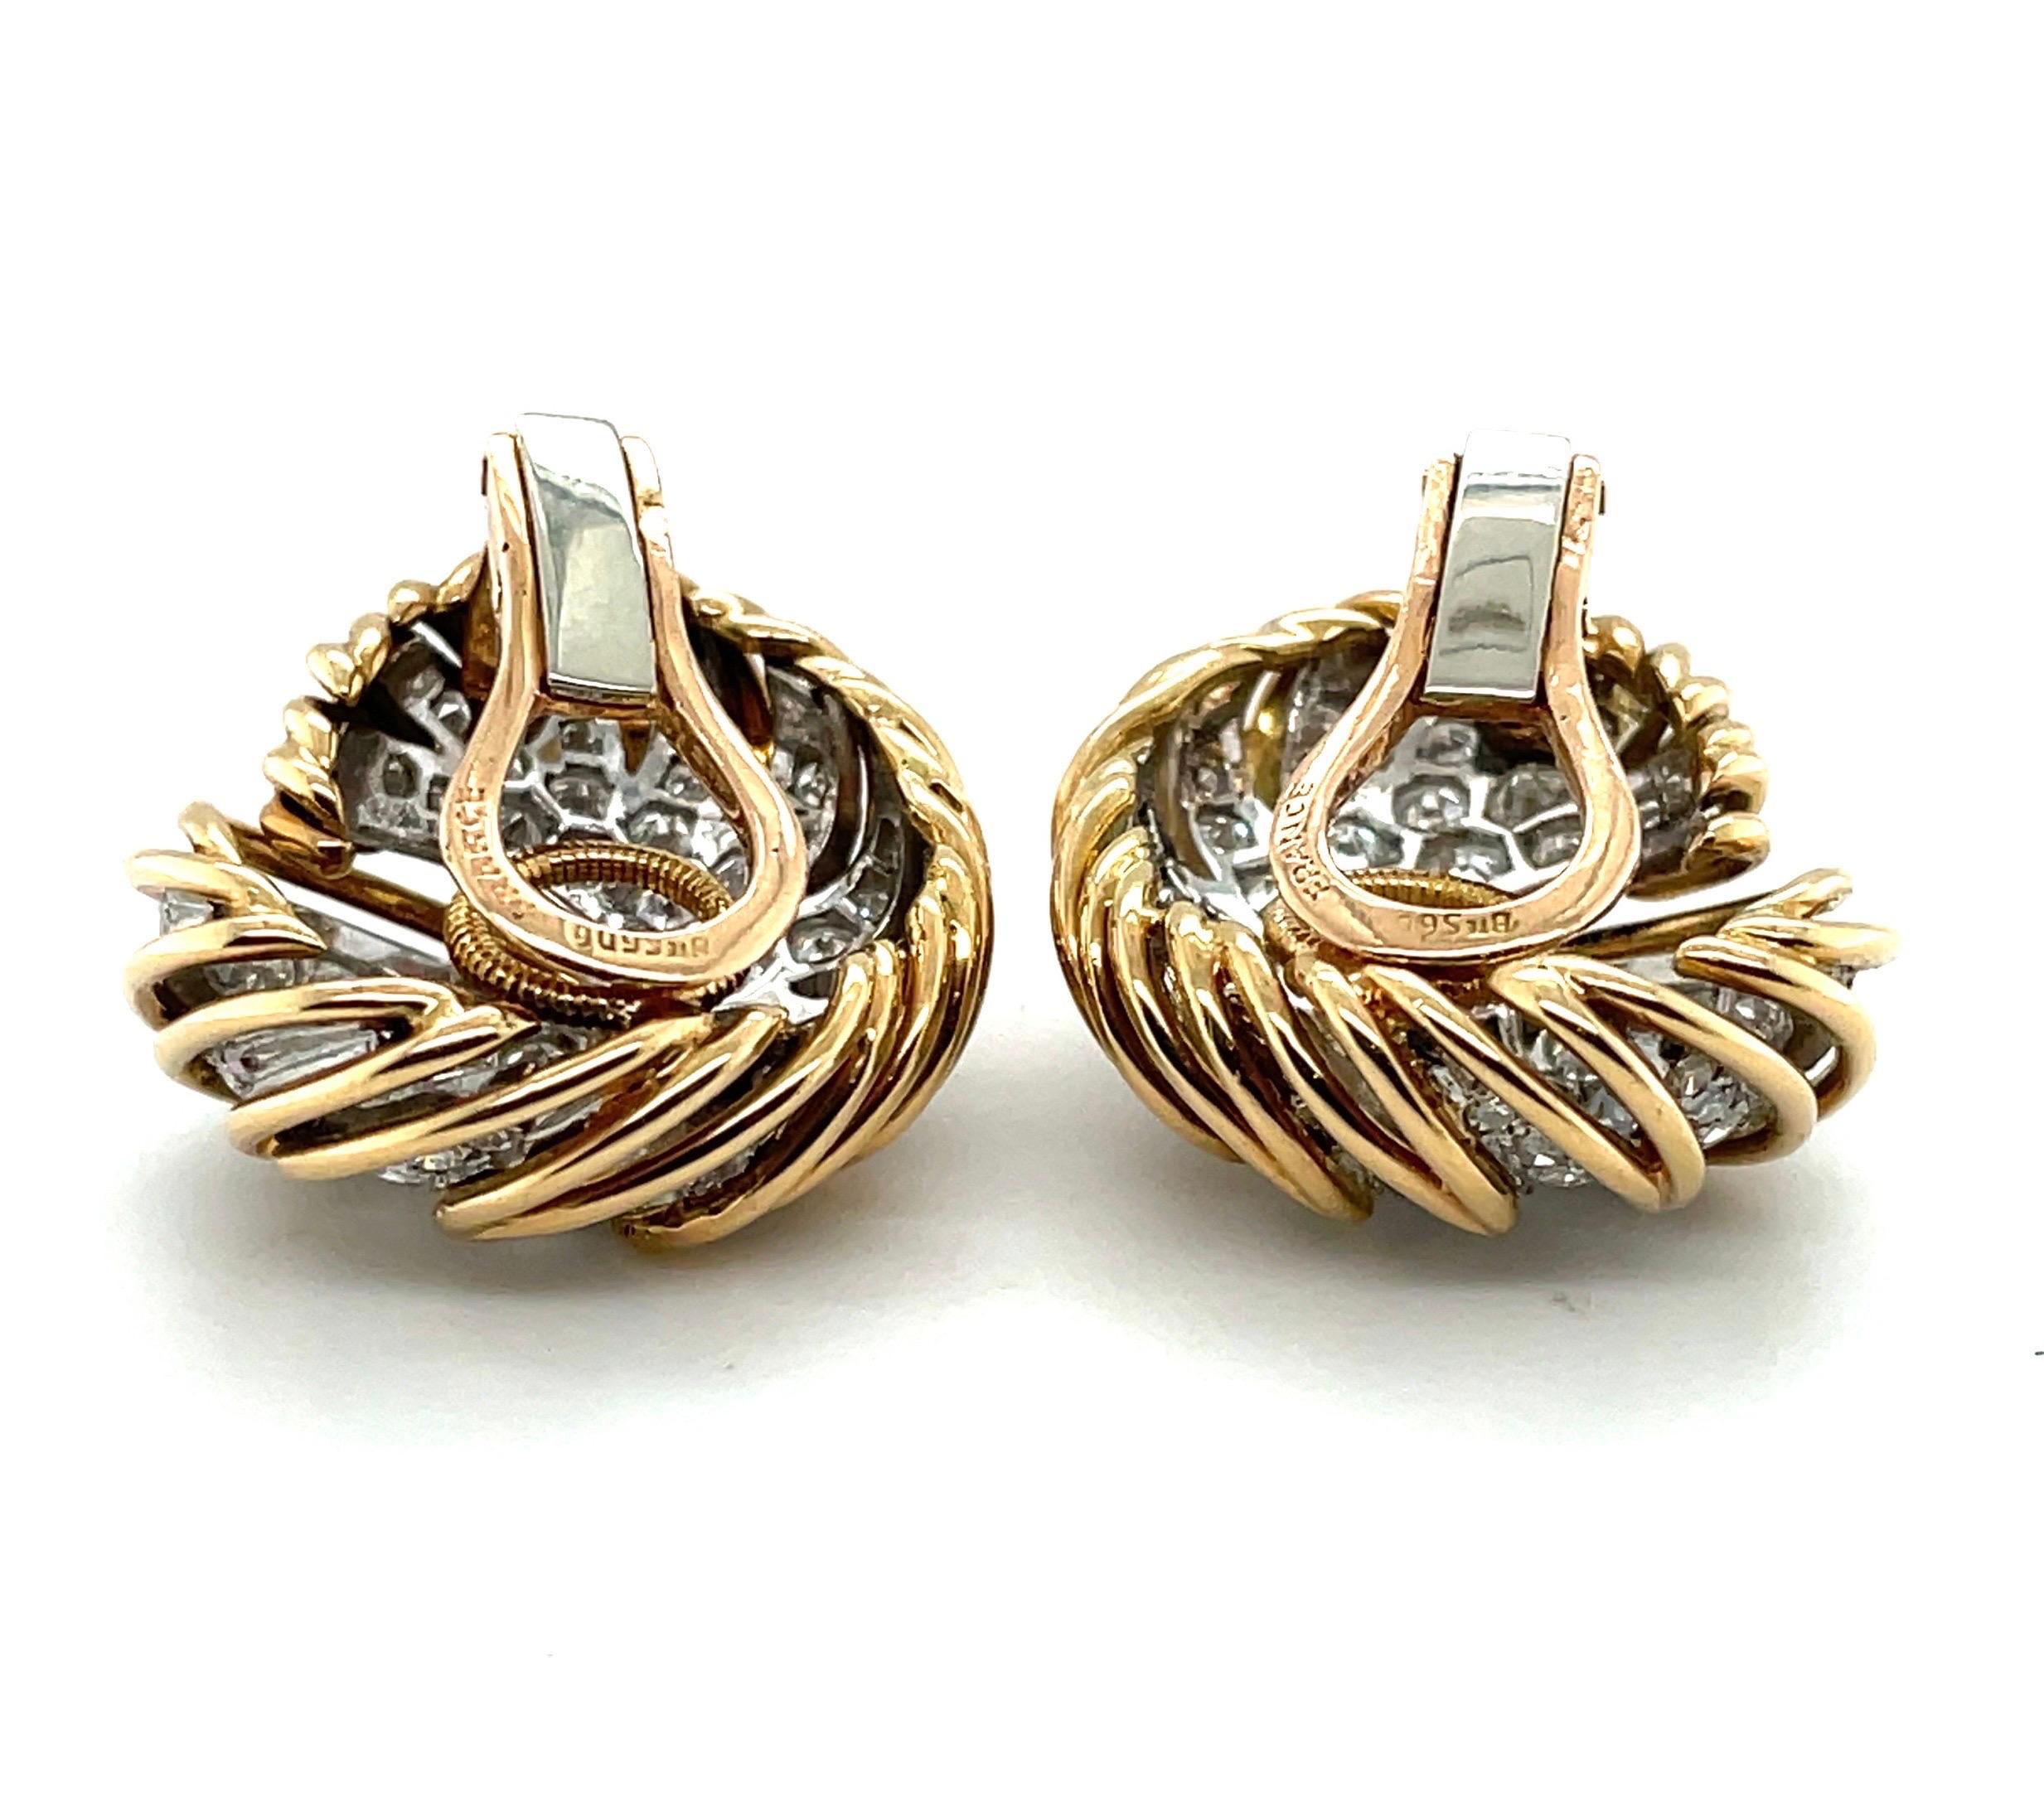 Brilliant Cut 18 Karat Yellow Gold and Platinum Diamond Earclips, France, circa 1950s For Sale